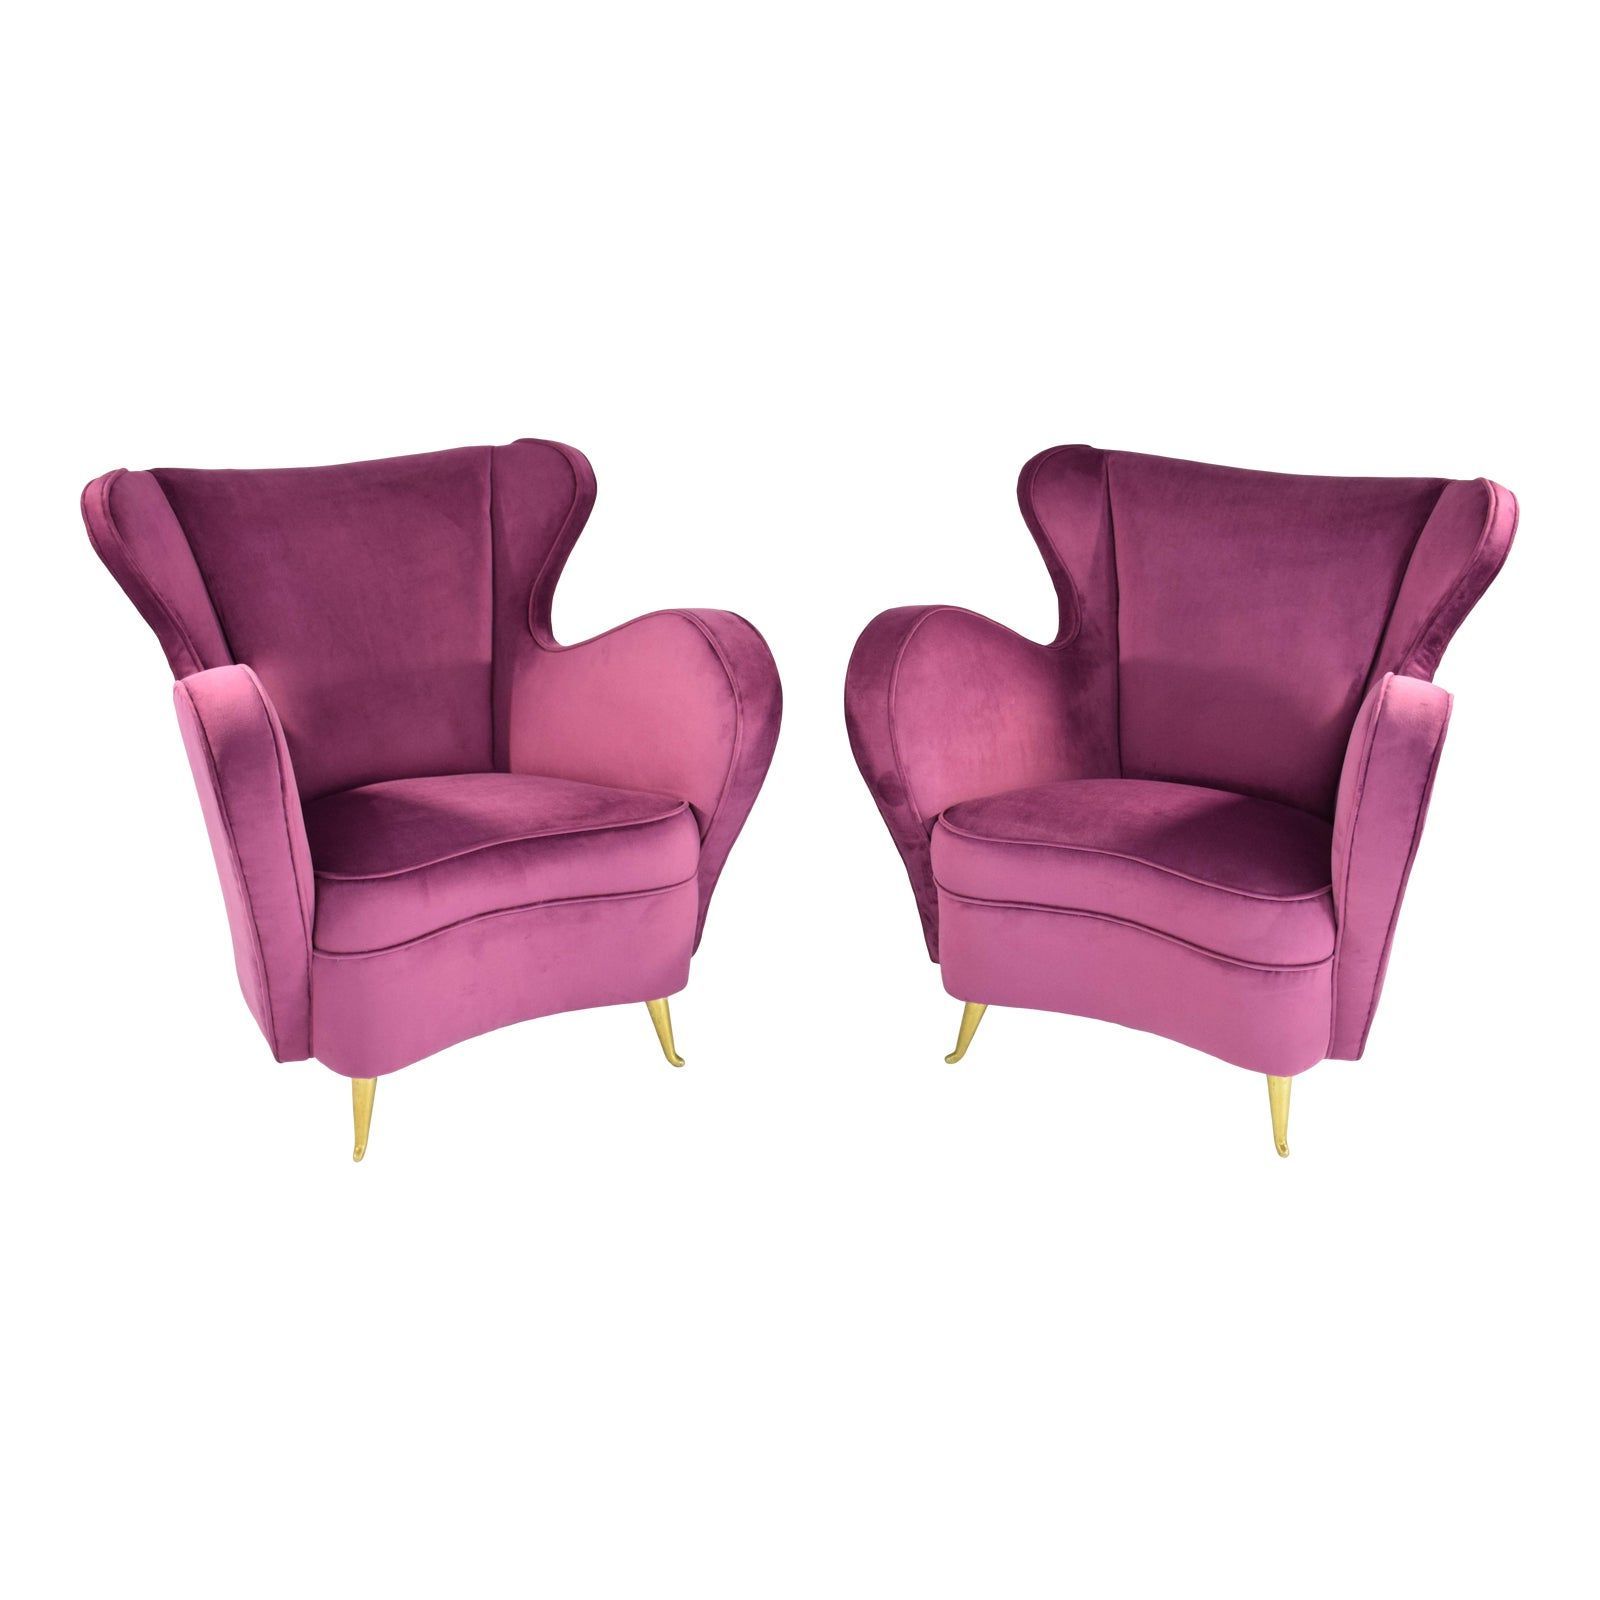 Didonato Tufted Velvet Armchairs With Most Recently Released Pin On New Reno (View 4 of 20)